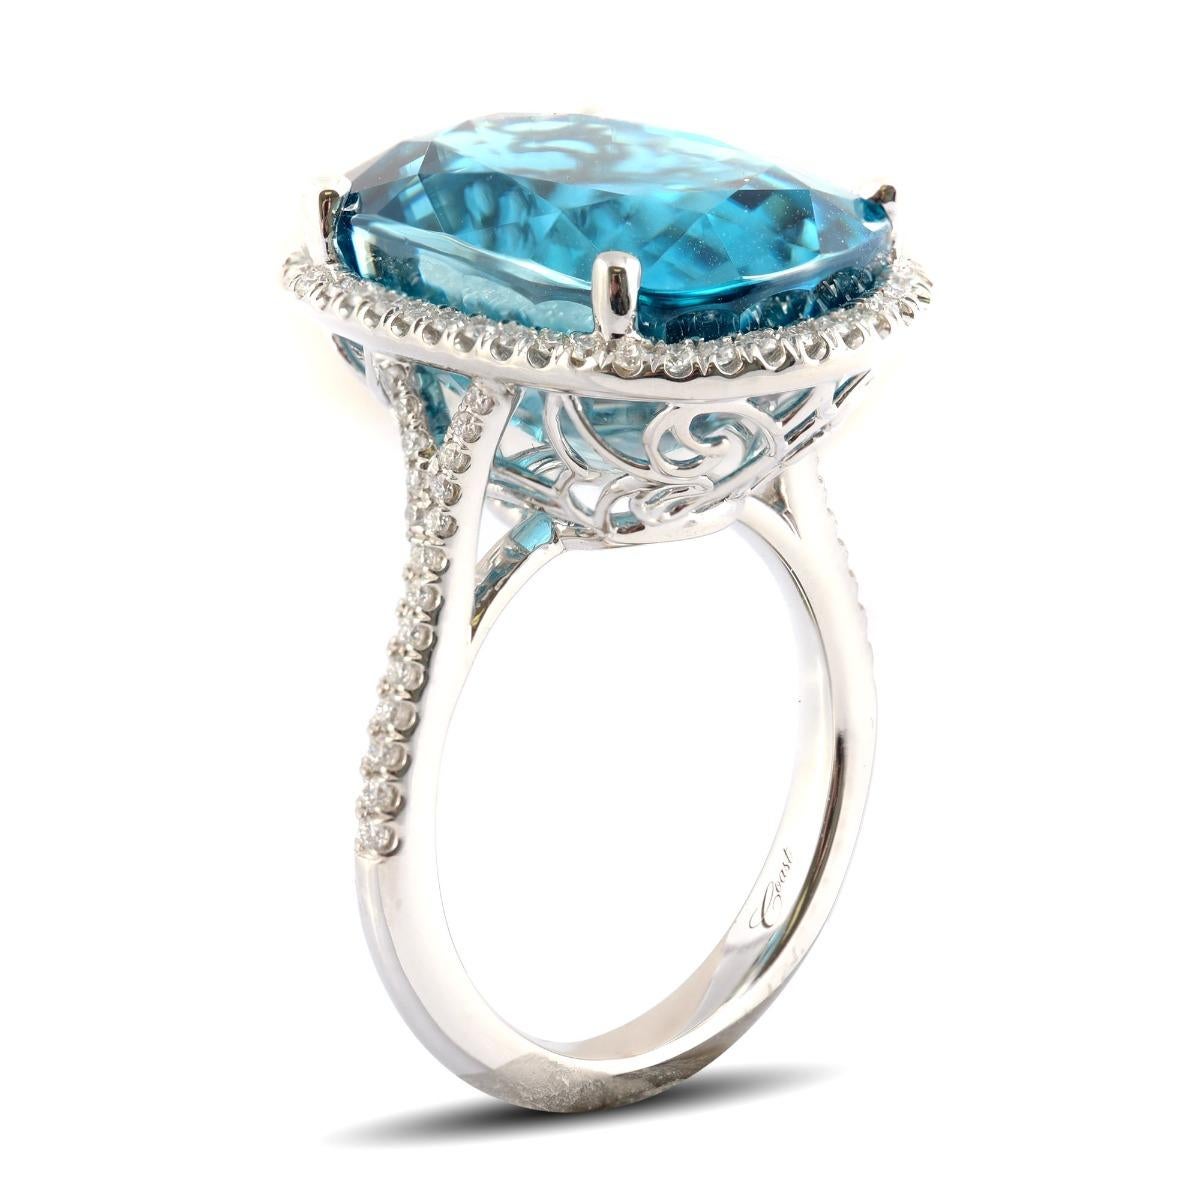 Zircons are known to heal and calm the mind, and this majestic and electric blue Zircon ring makes a statement in itself. Weighing 26.88 carats, the center stone that has been cut to perfection and is free from eye visible inclusions. A piece that